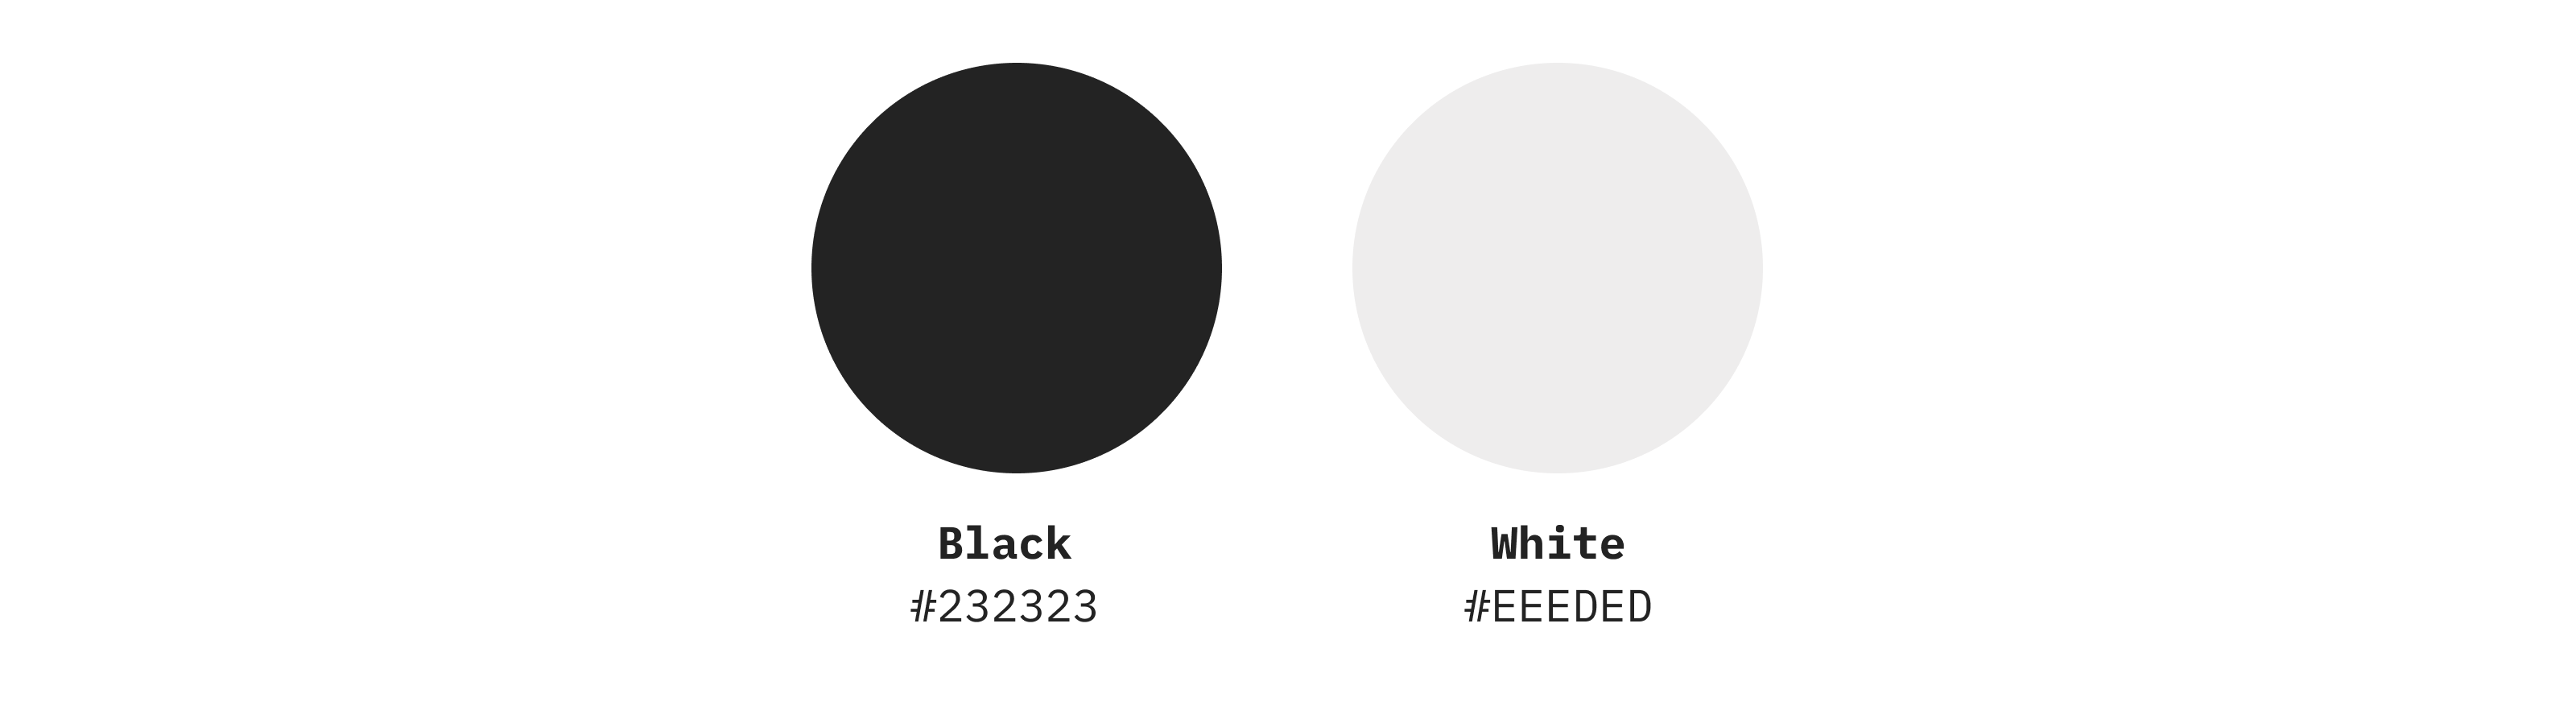 The colors: black and white